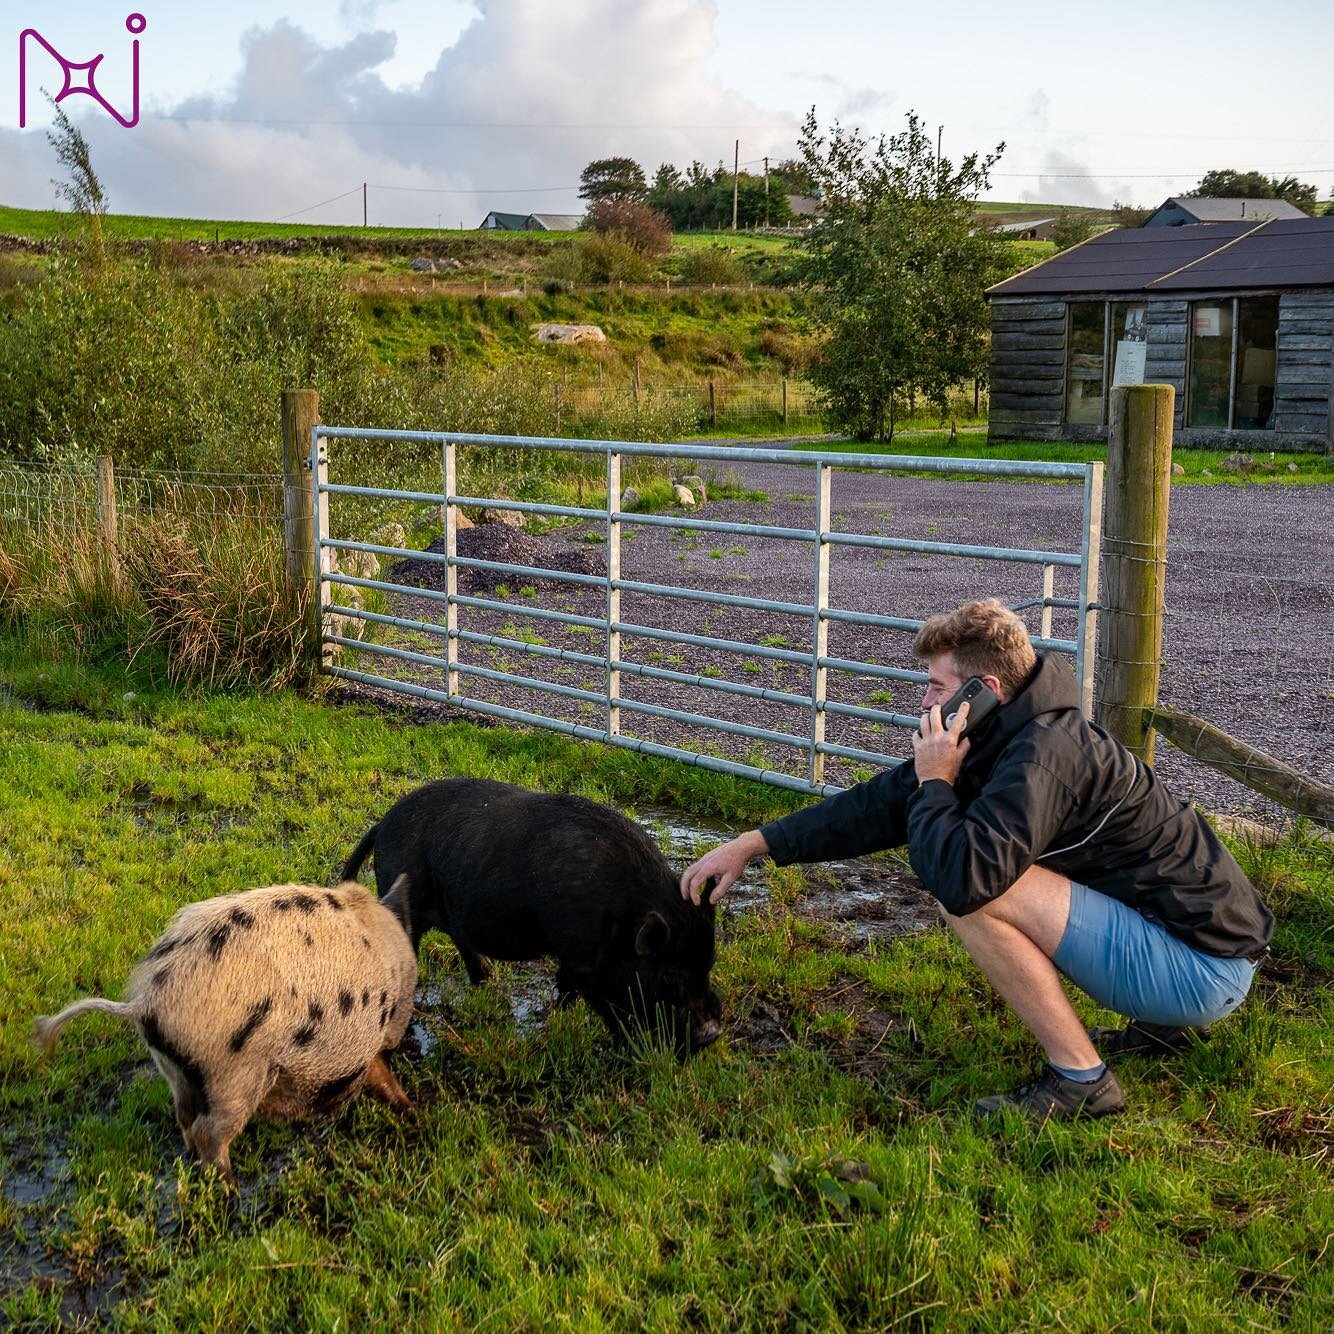 Dan Ward multi-tasks while meeting a local inhabitant of a farm in Eryi - Wales Transition Lab #walestransitionlab #northstartransition